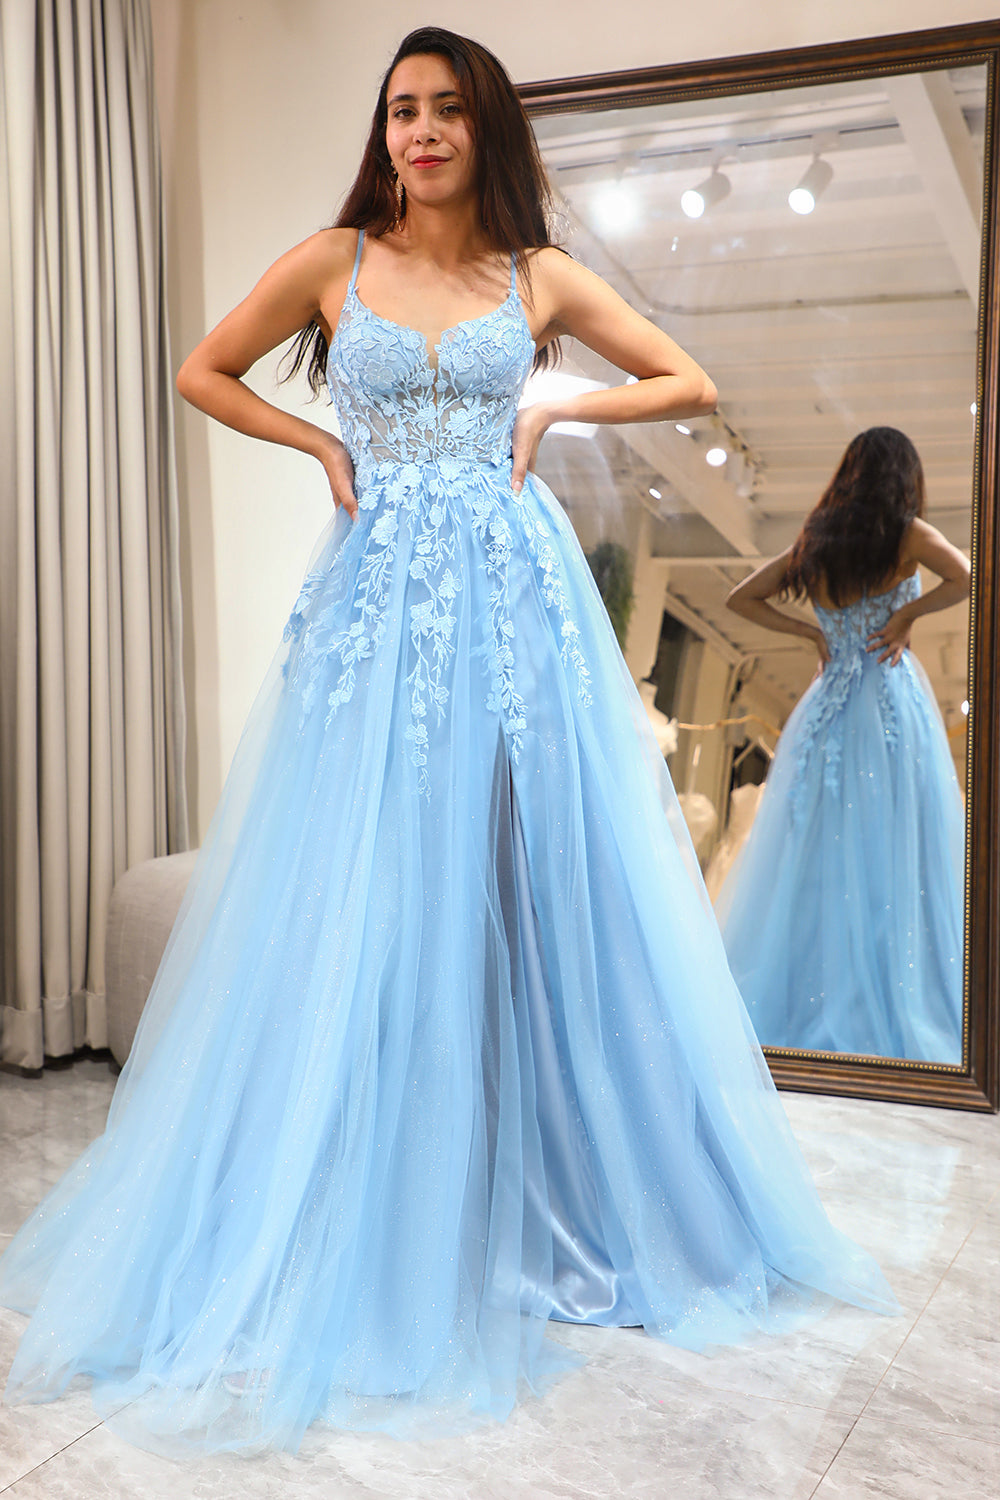 ZAPAKA-Party Zapaka Women's Tulle Light Blue A-Line Spaghetti Straps Beading Prom Party Dress with Slit, Blue / US18W